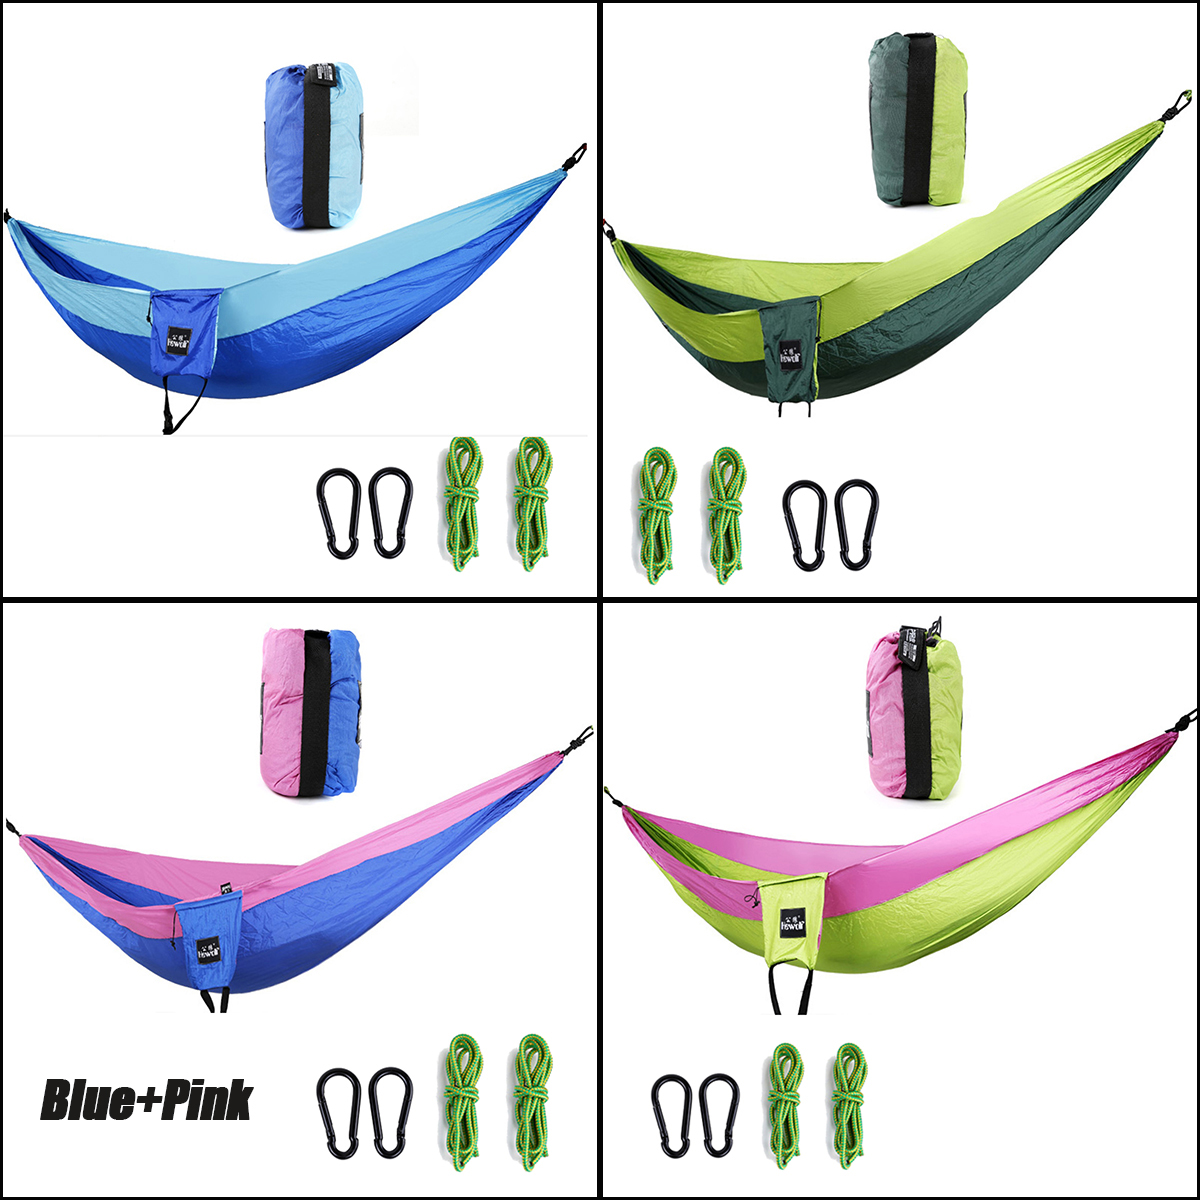 Hewolf-260x150cm-Outdoor-Double-Hammock-Camping-Hanging-Swing-Bed-With-Mosquito-Net-Max-Load-200kg-1428138-2